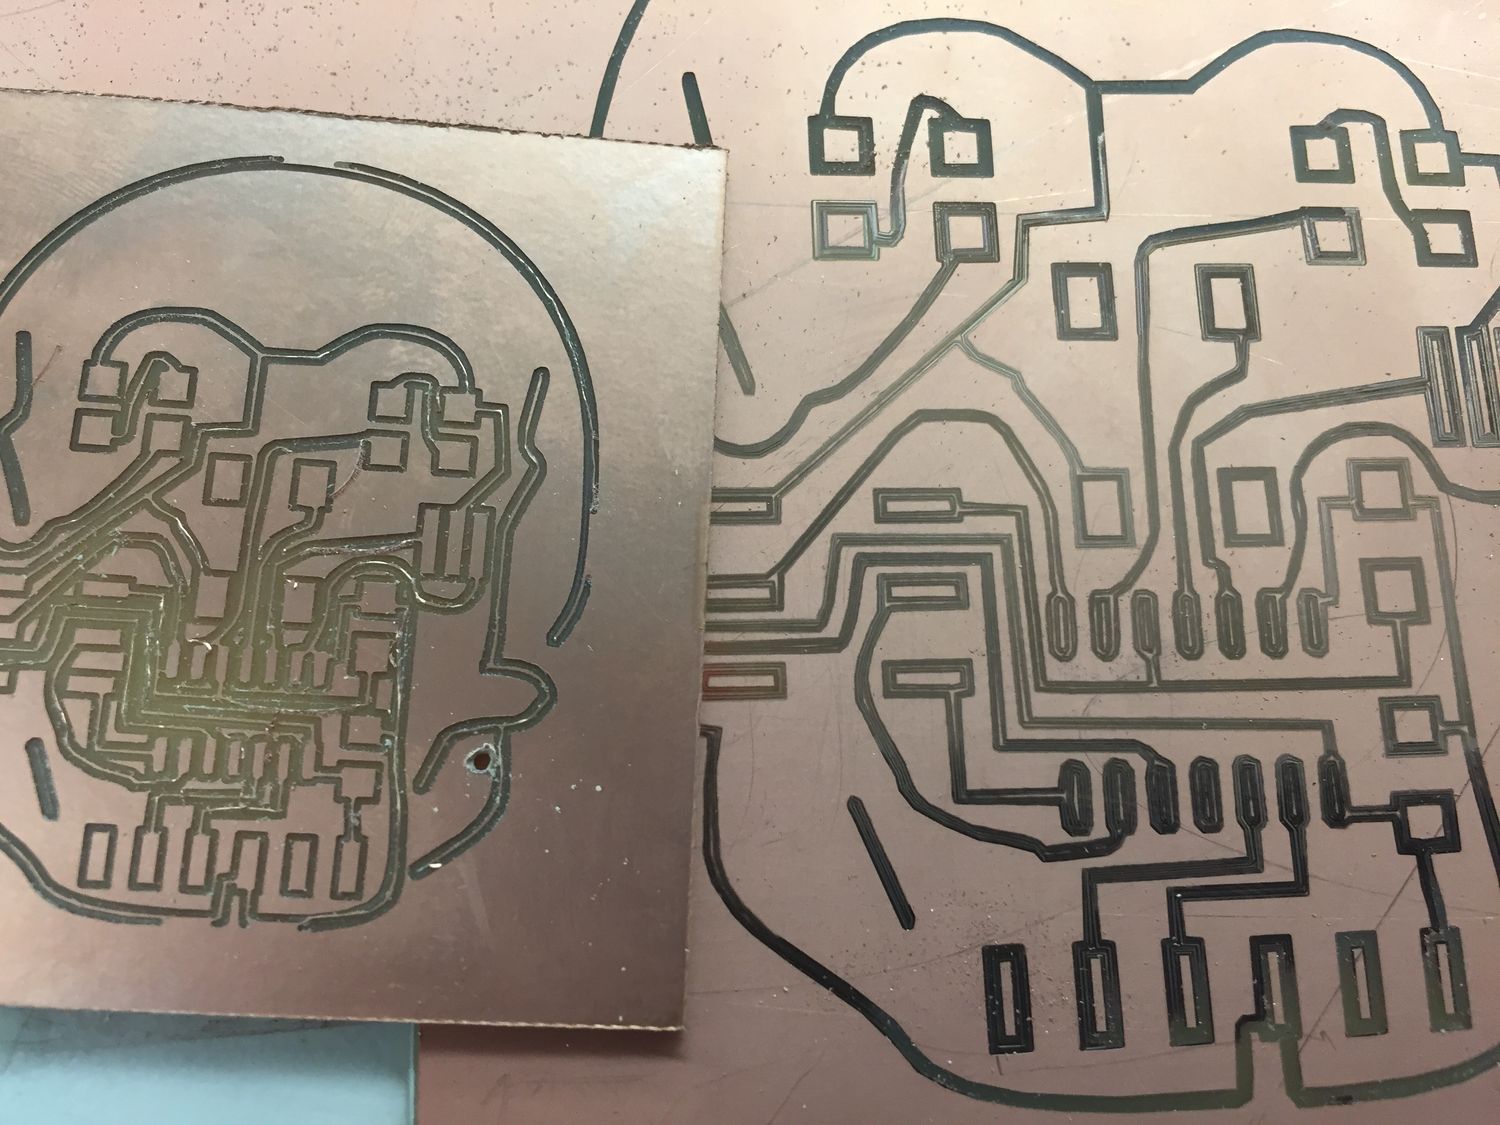 Two copper circuit boards designed to look like a scull